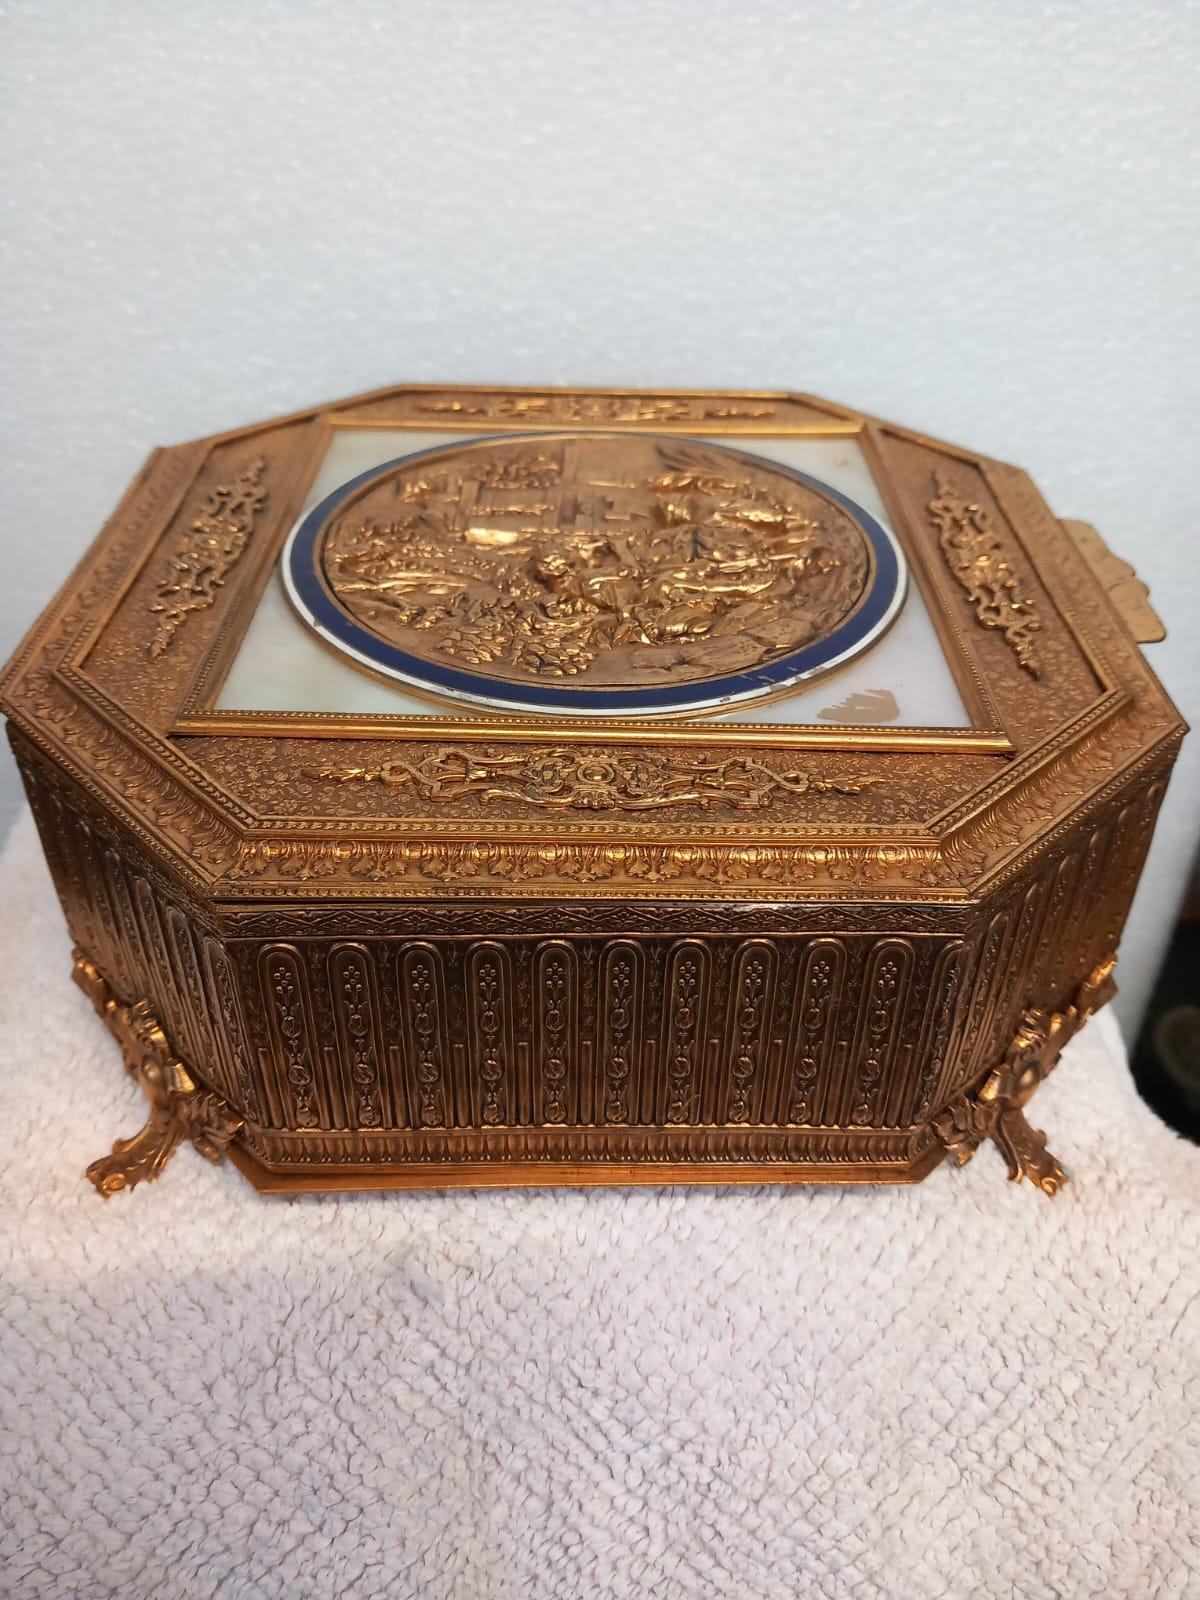 Palais Royal gilt bronze and mother of pearl jewellery casket or trinket box For Sale 5